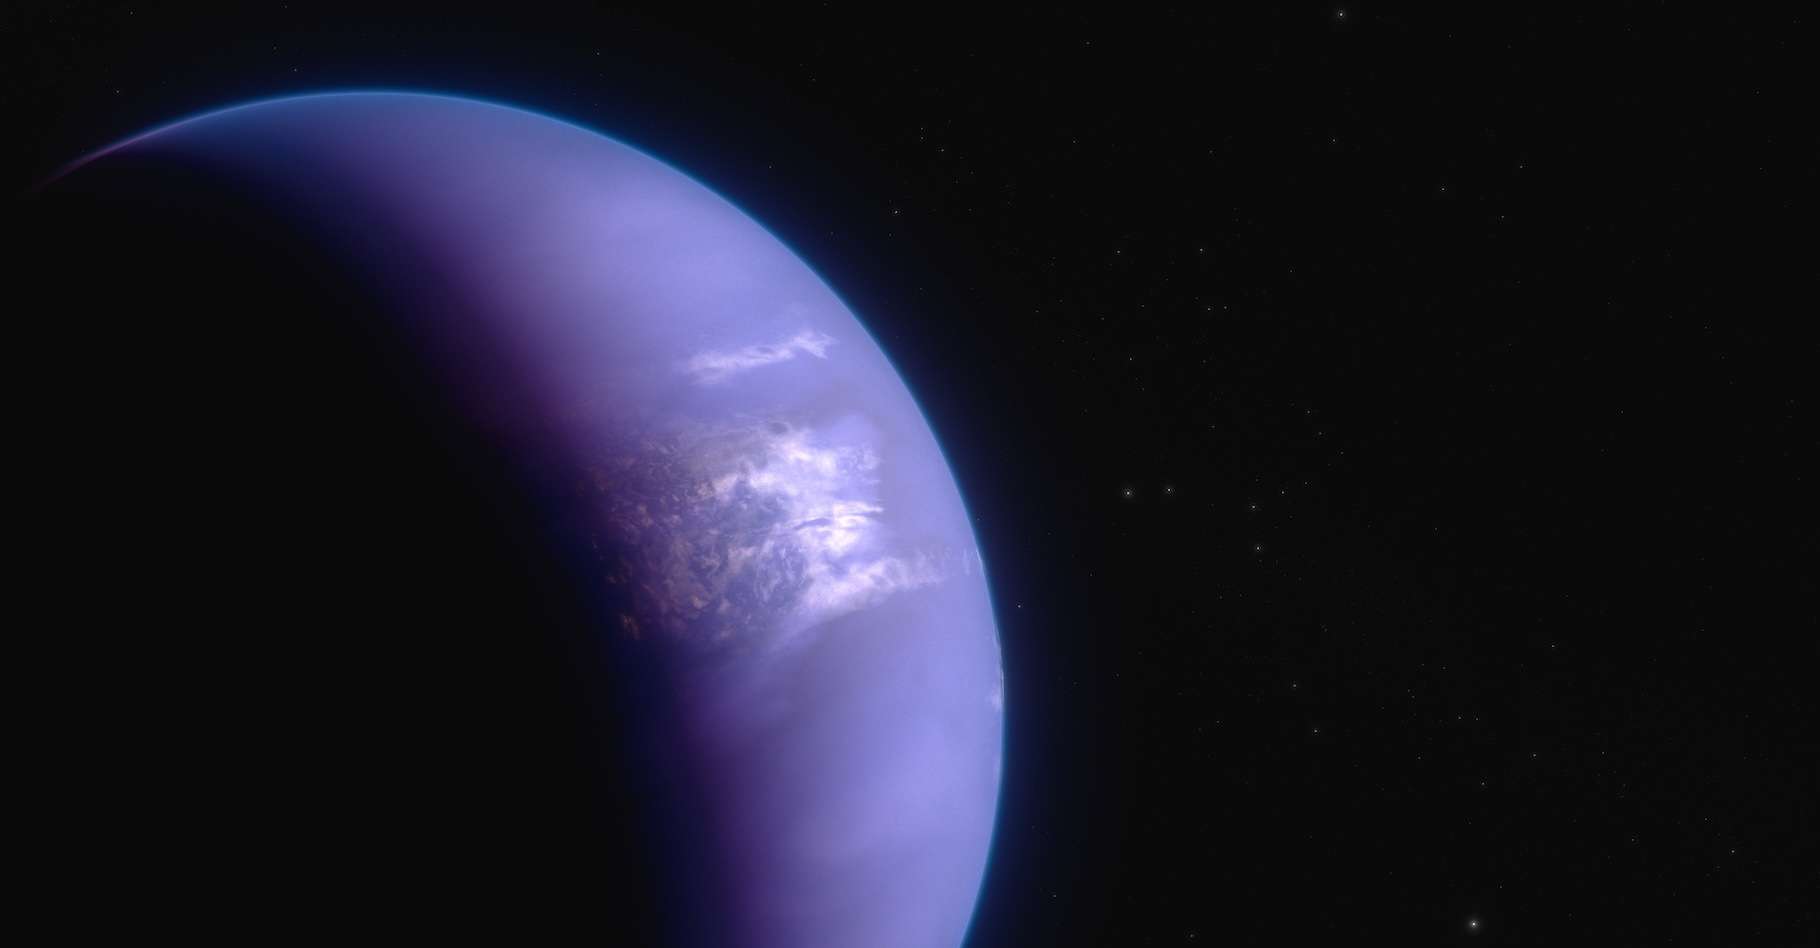 The James-Webb Telescope reveals extreme weather on the planet driven by hypersonic winds!